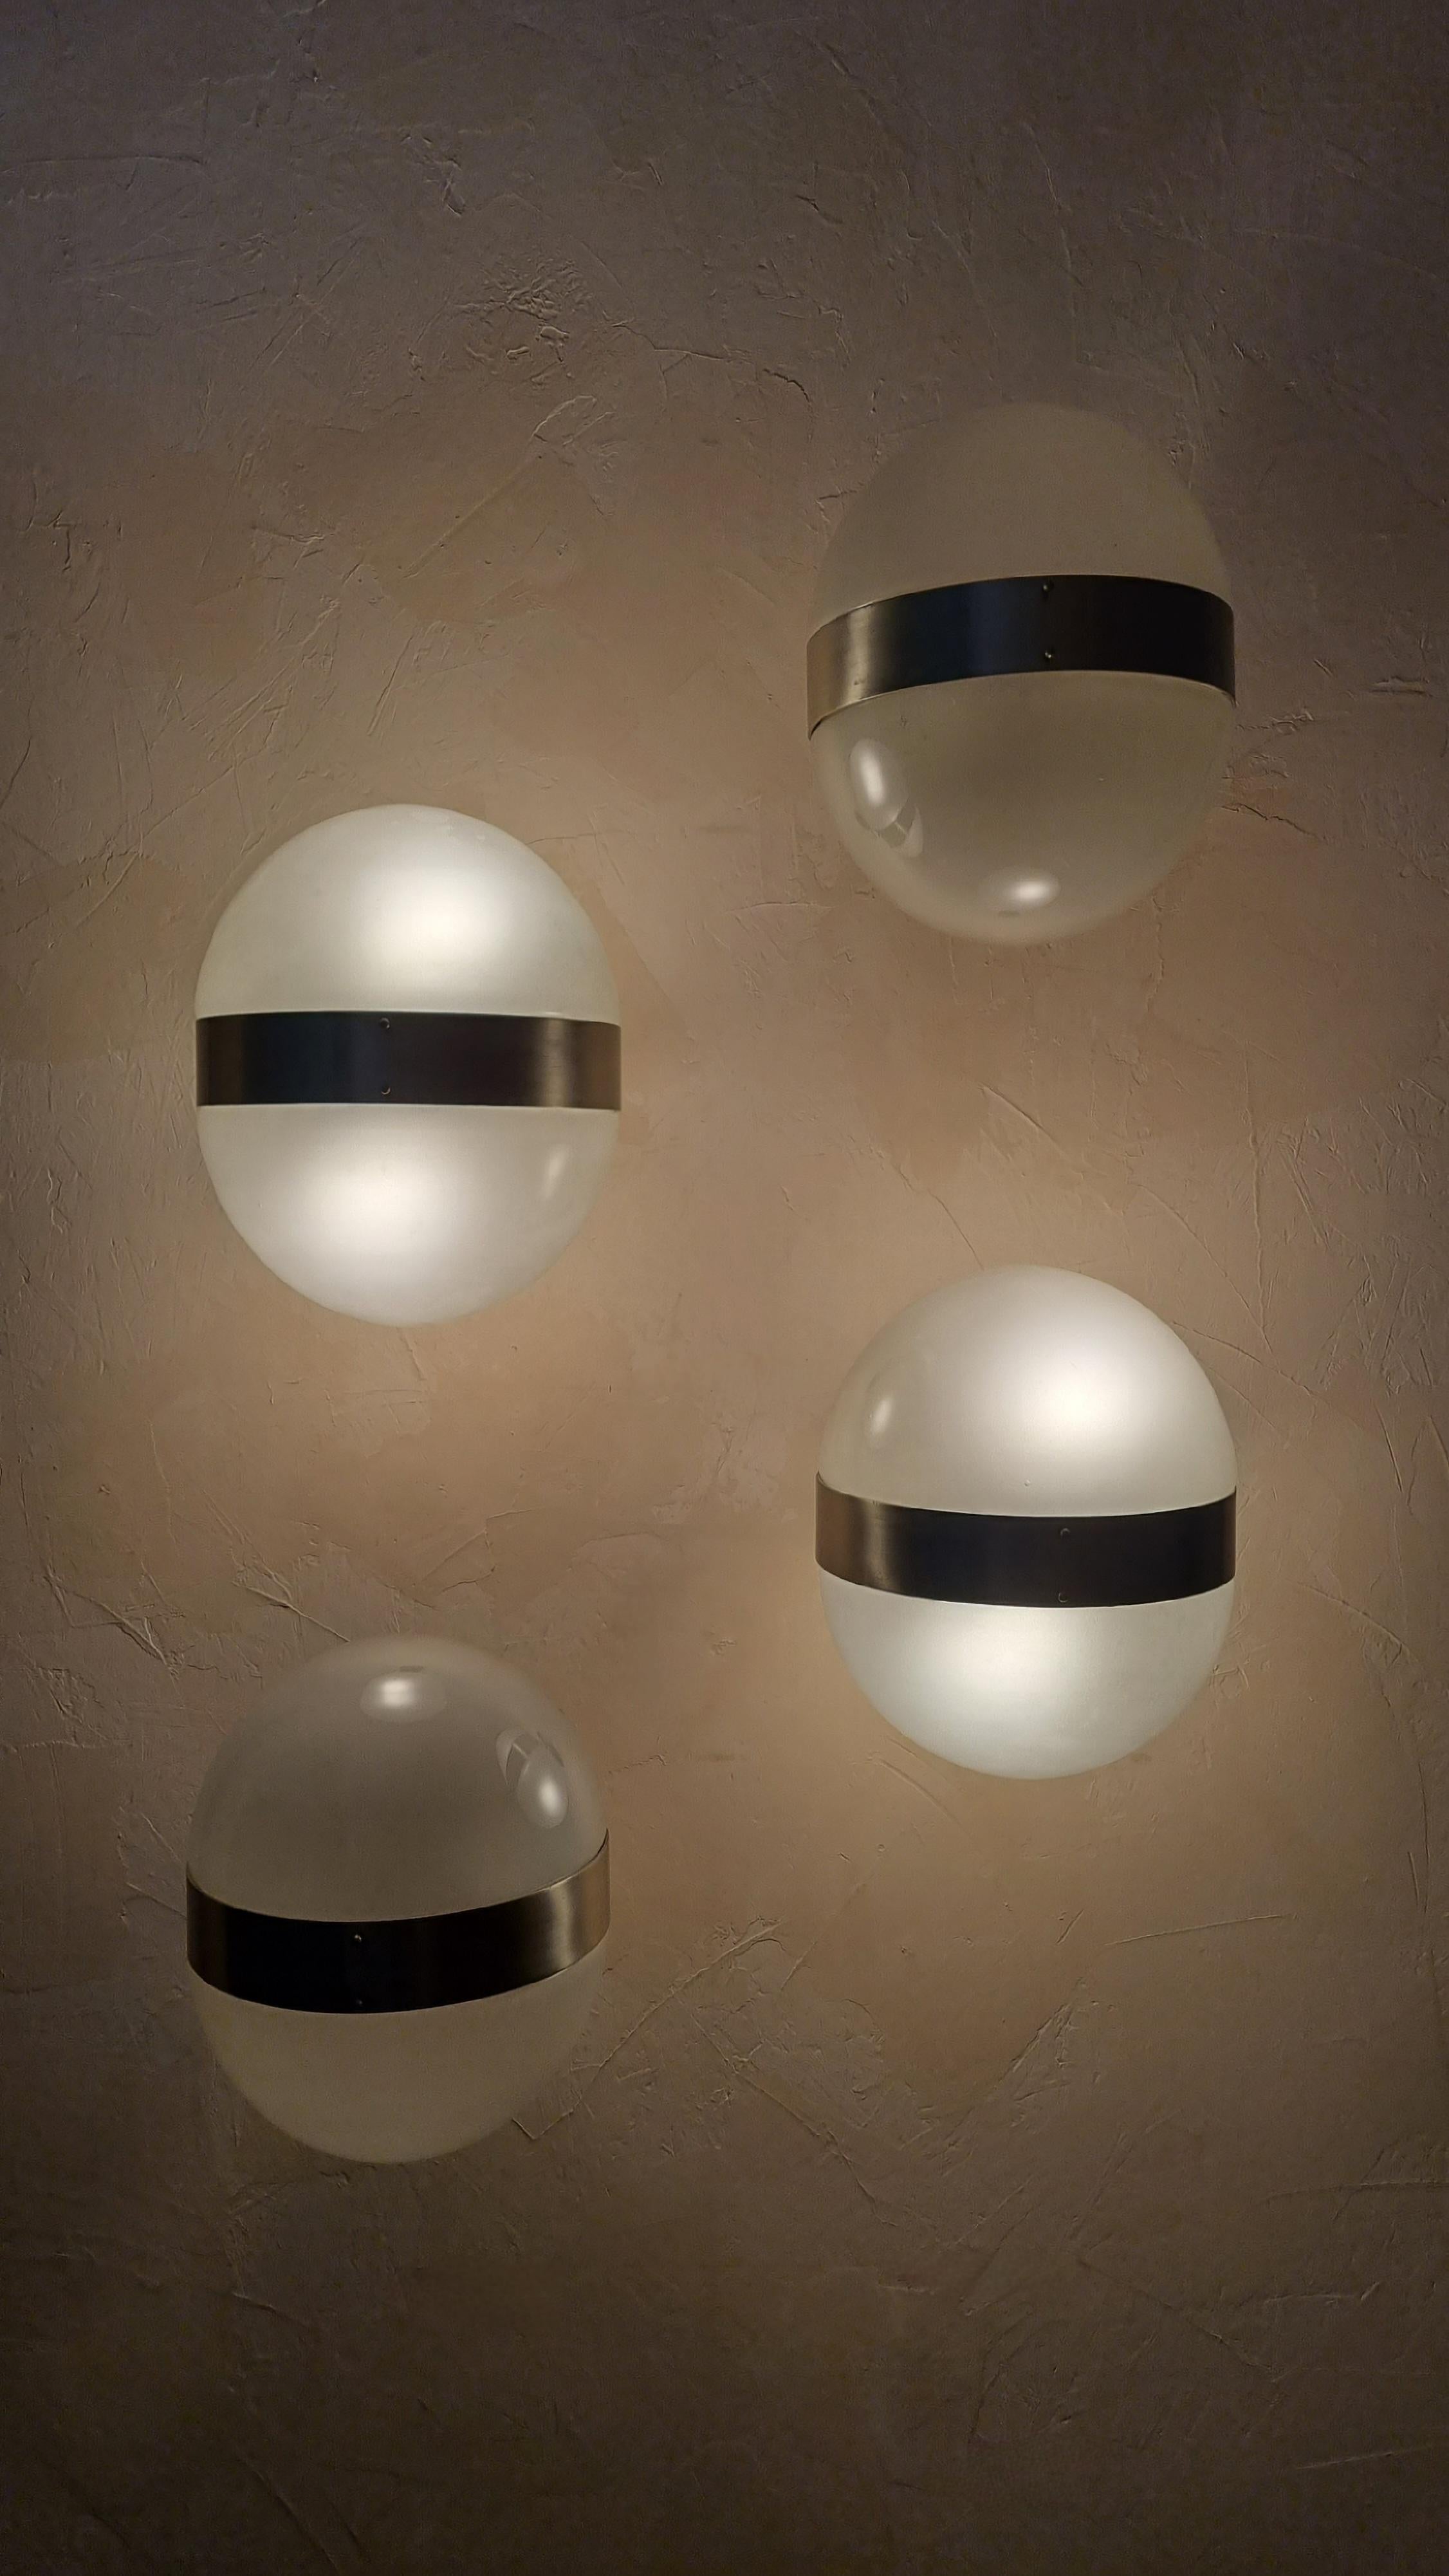 Set of 4 Clio wall sconces designed by Sergio Mazza for Artemide in the 1963, frosted glass lampshade , structure in nickel-plated brass, each lamp  superimposed 2 light points that emit a warm and soft light. mounts E 27 bulbs.
Excellent